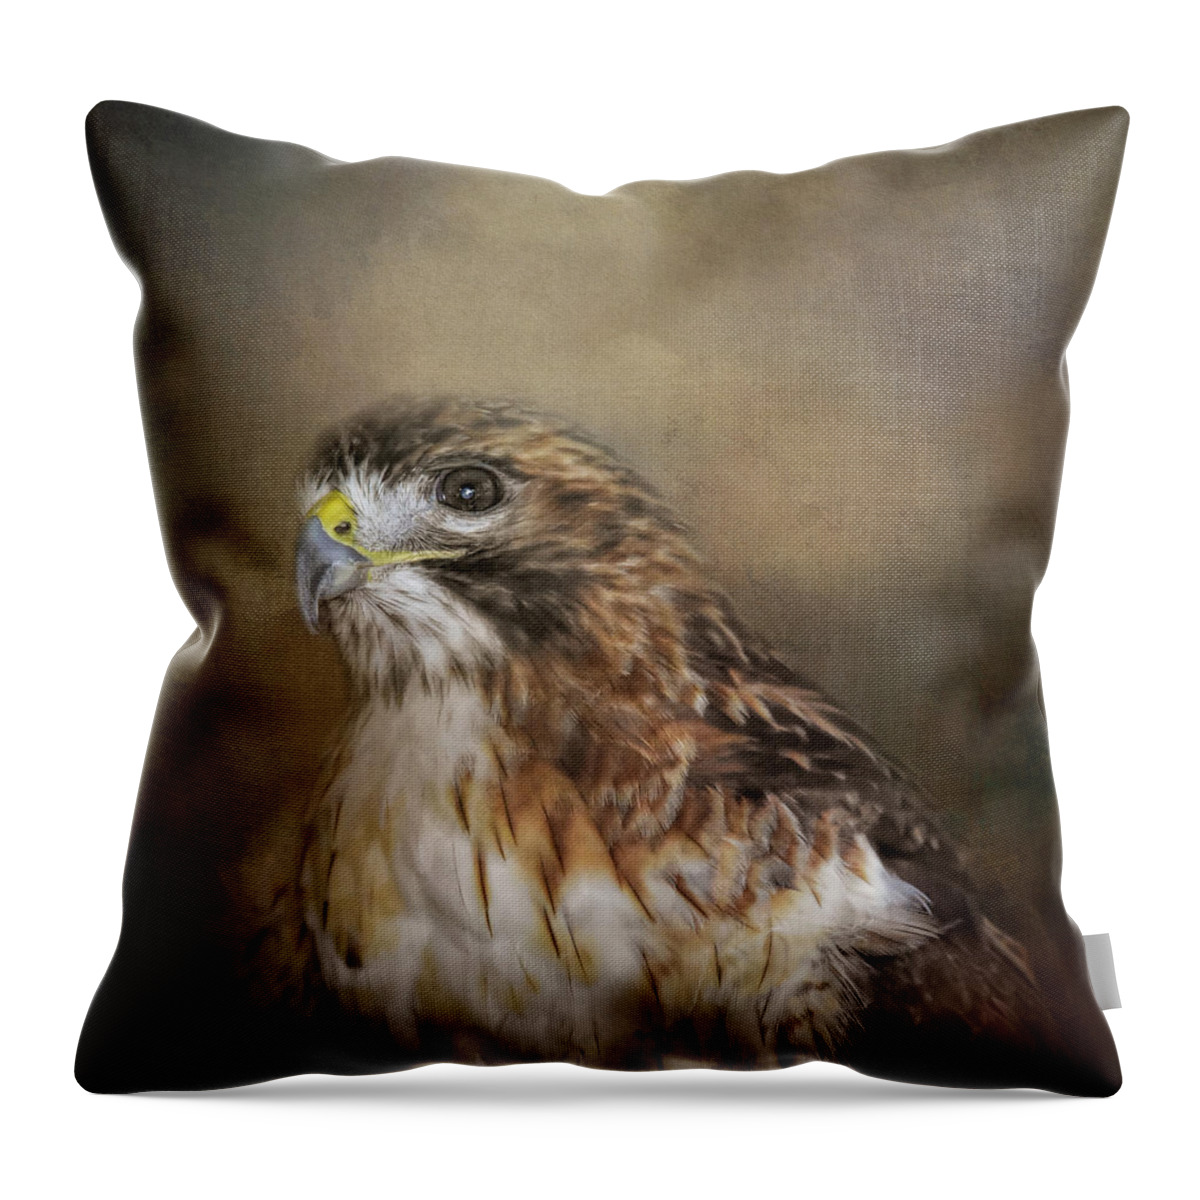 Hawk Throw Pillow featuring the photograph Dreaming Of The Day by Jai Johnson